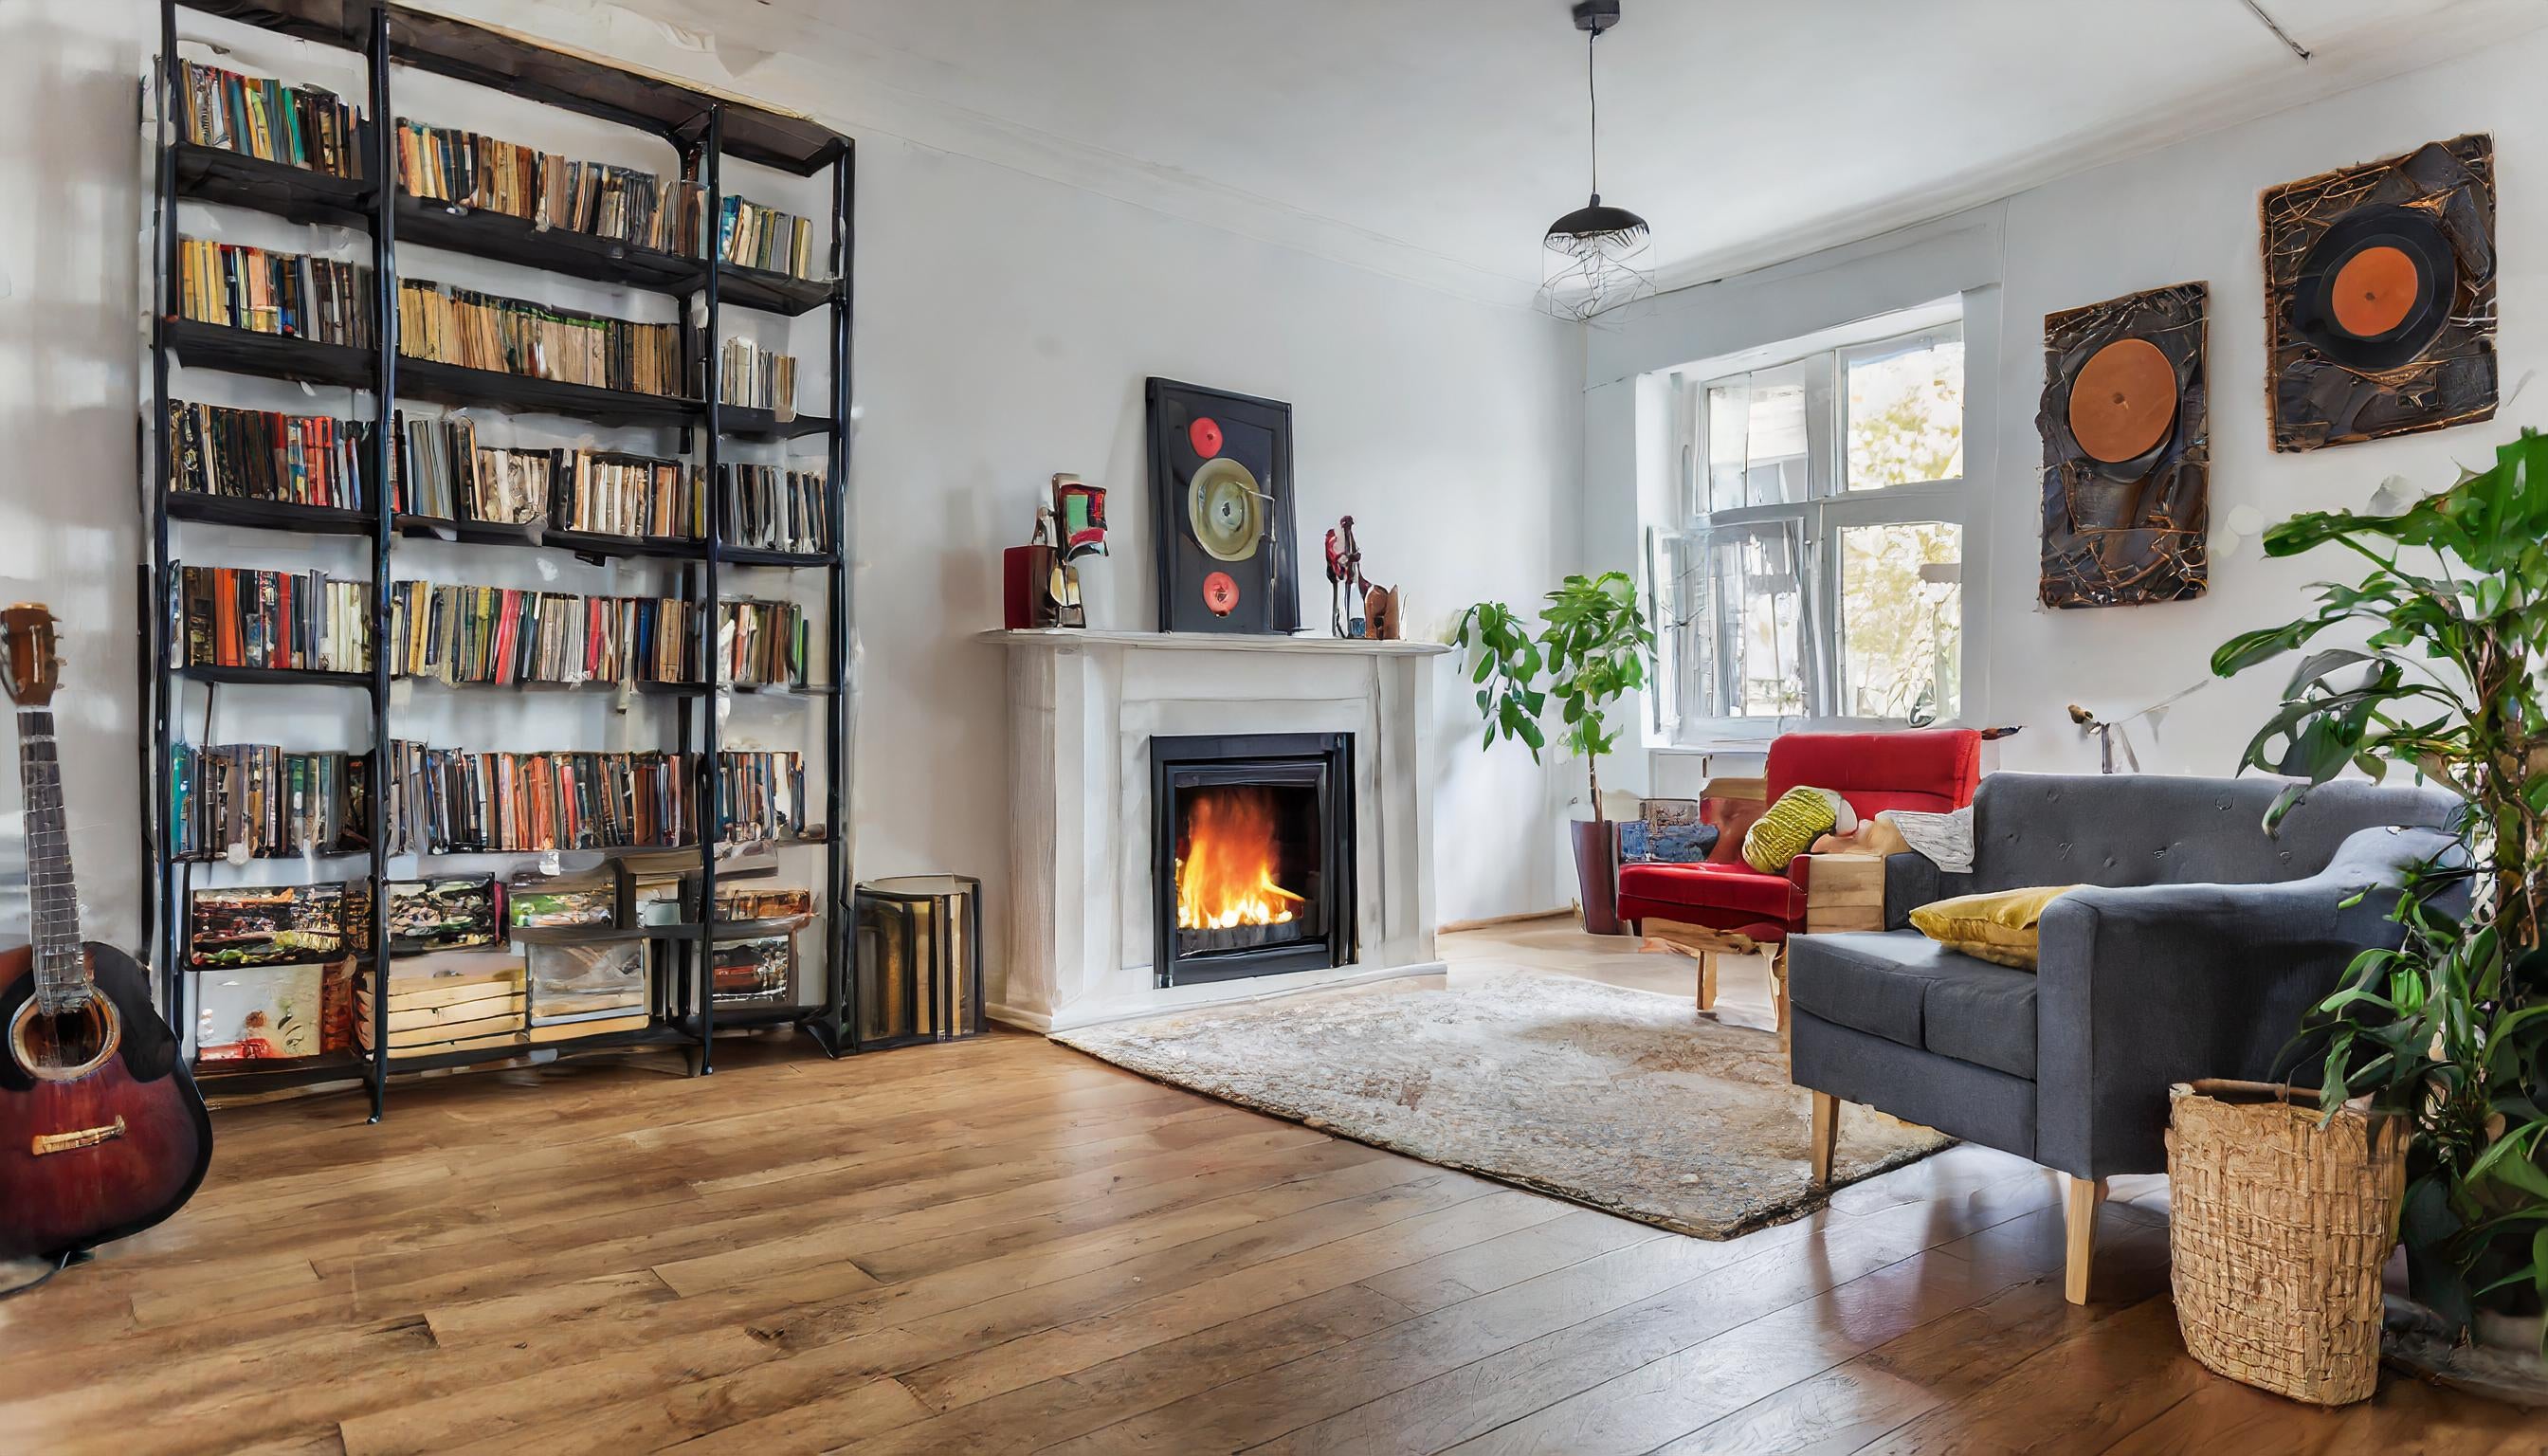 Modern_apartment_with_wooden_floor_fireplace_white_wall_and_bookshelf_full_of_music_recor